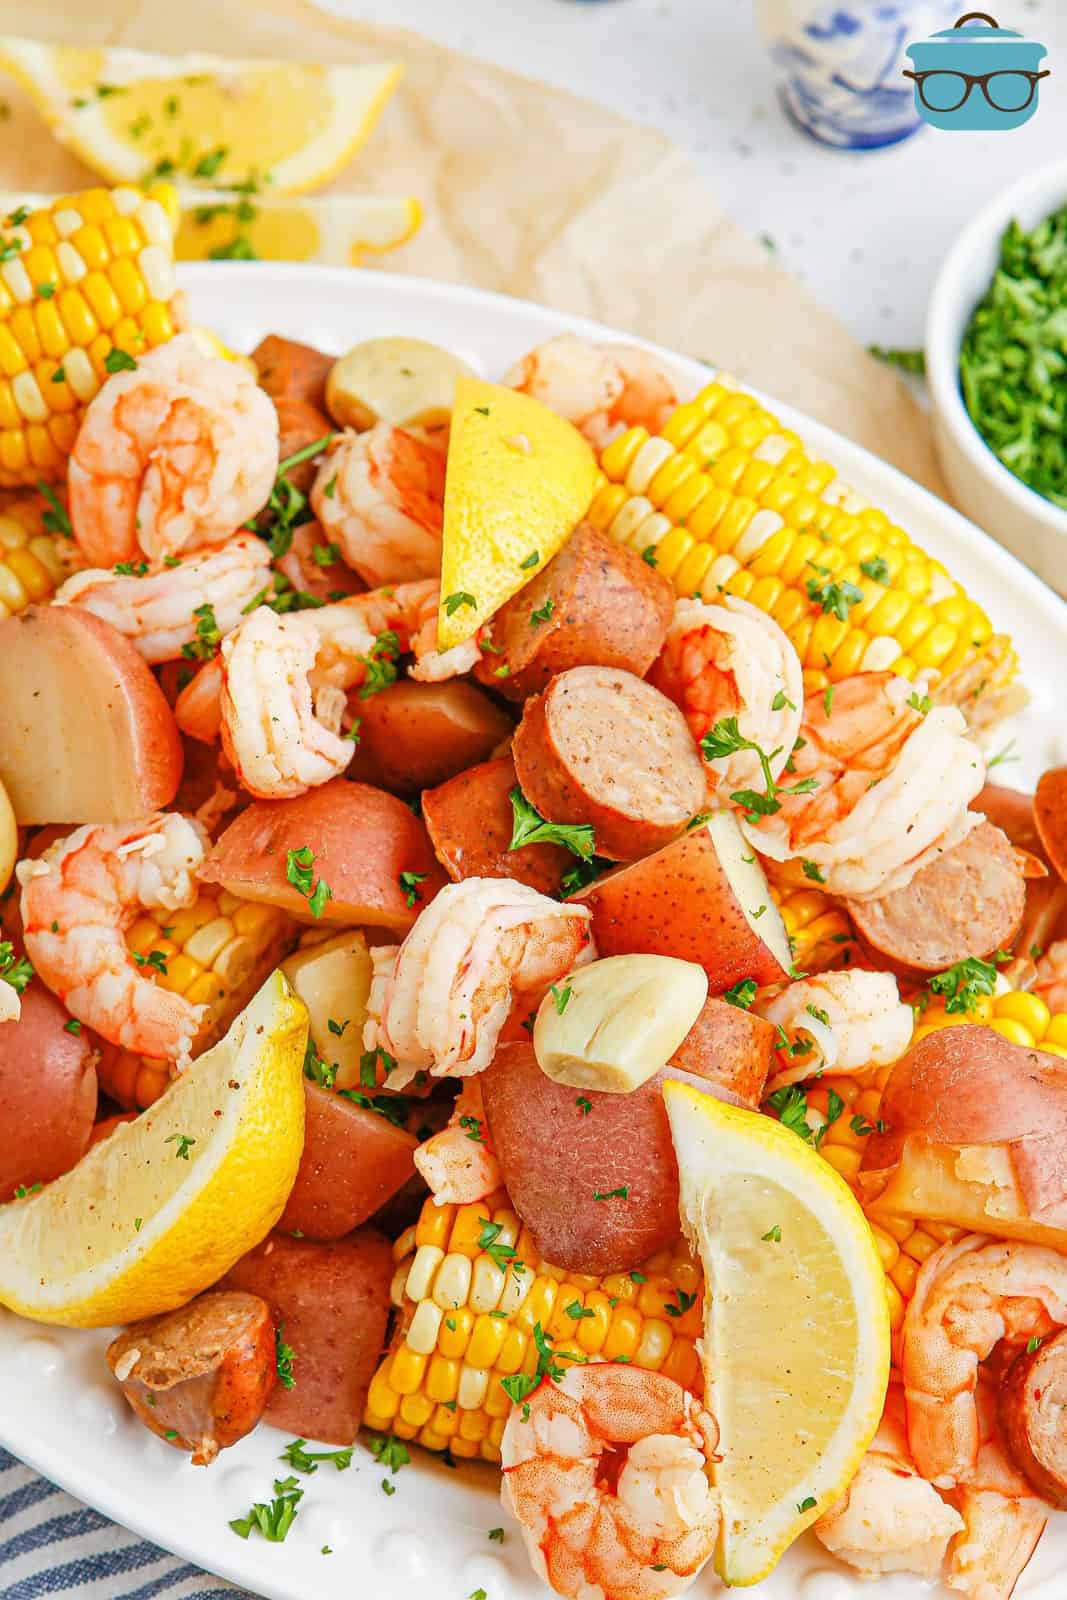 Looking closely at a Shrimp boil dinner on a platter.